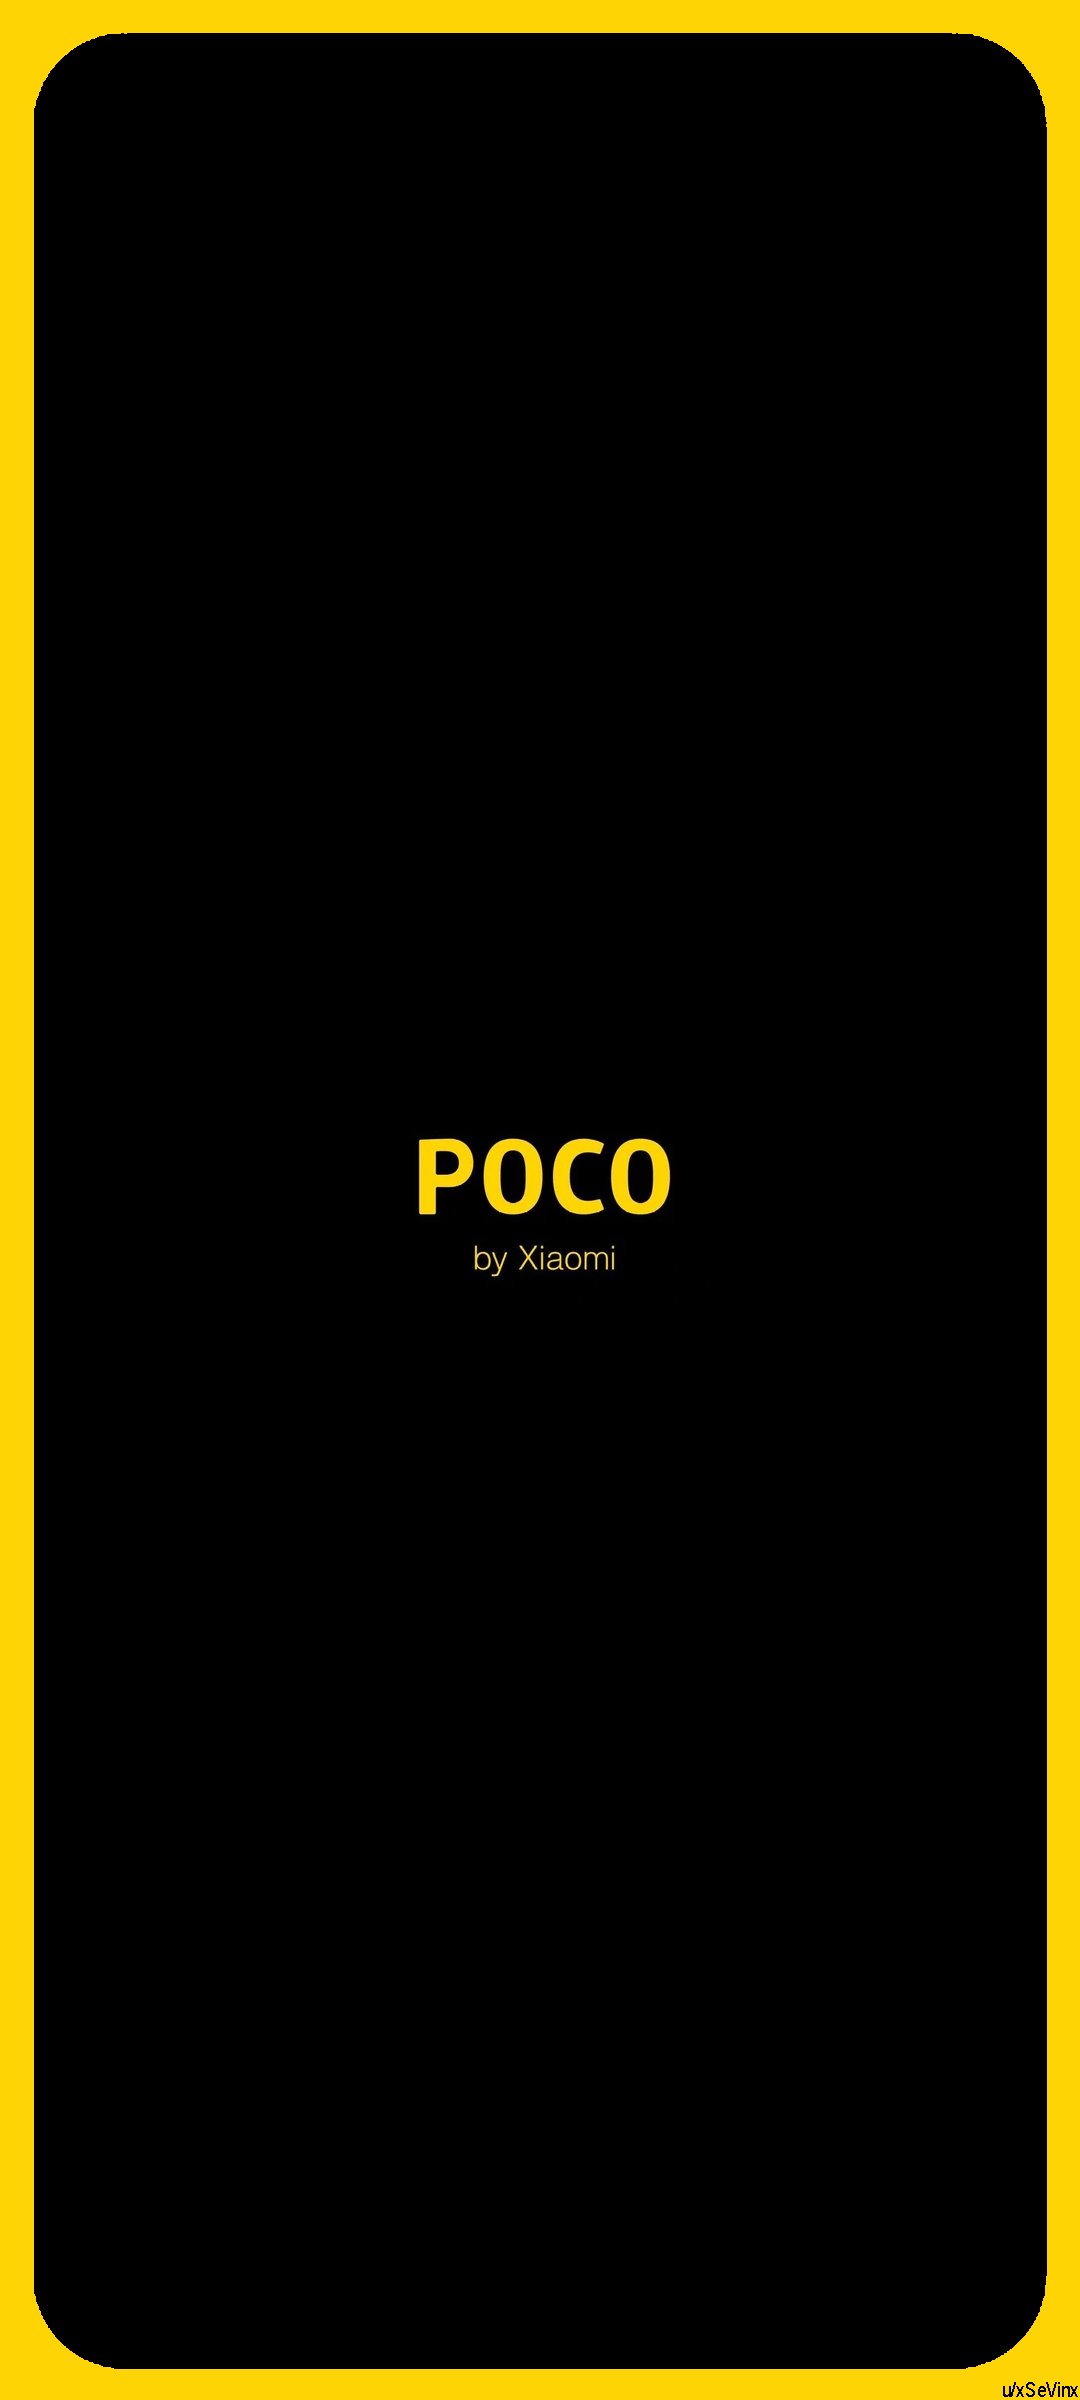 Somebody asked for background for poco x3. Hope it fits. If not I can tweak it a little bit.: PocoPhones